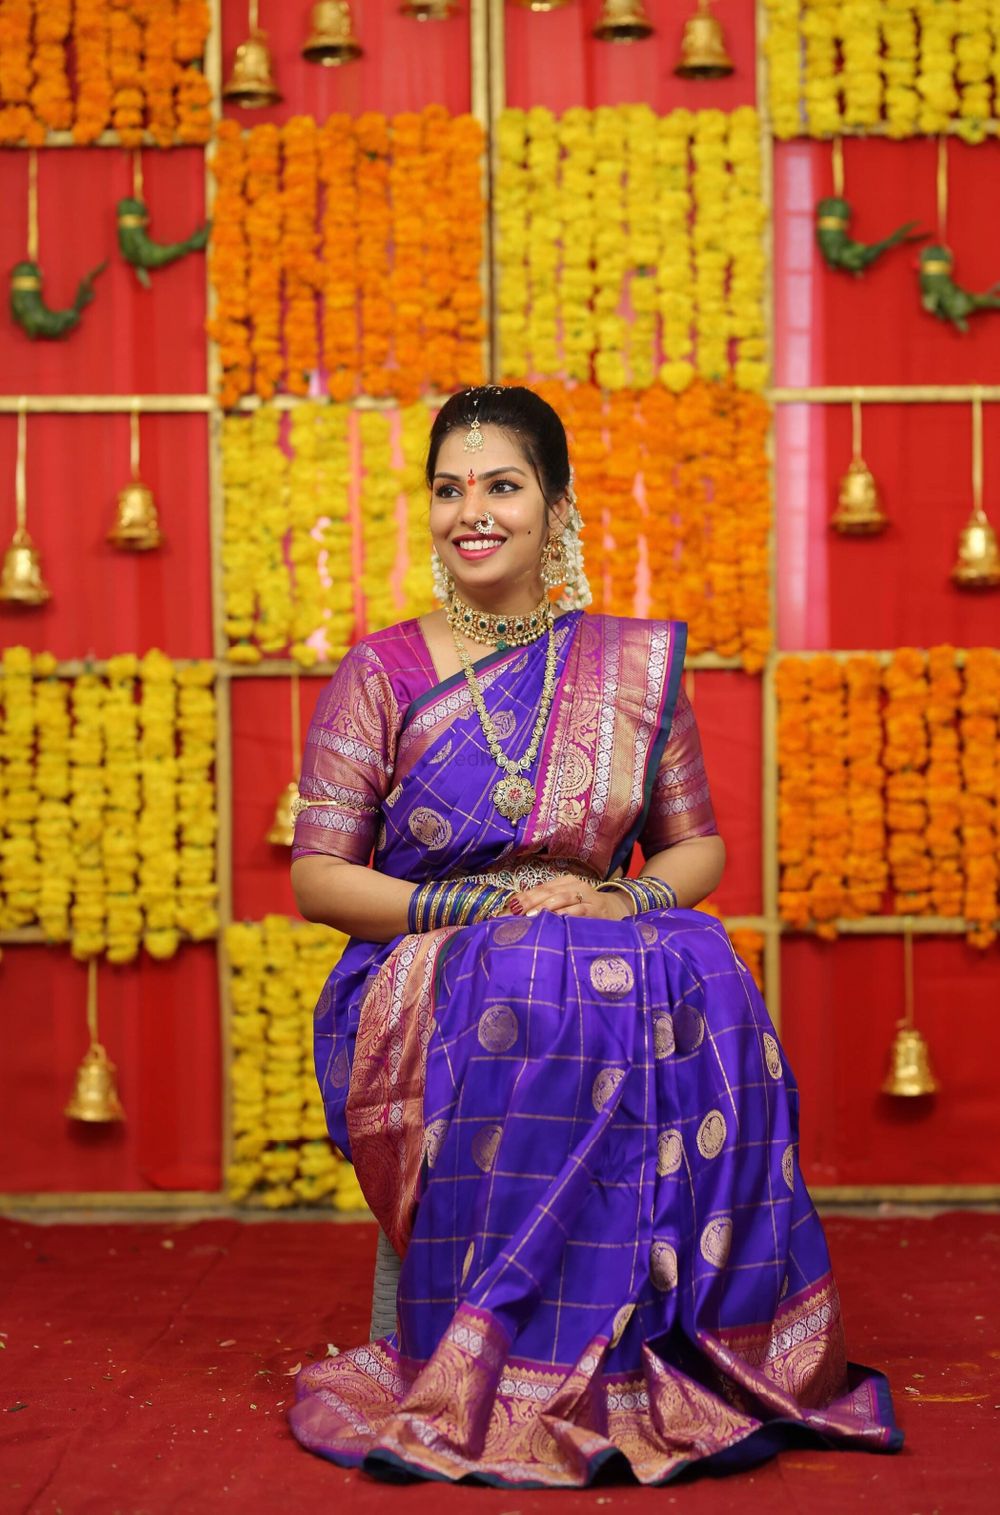 Photo of A south Indian bride sitting in front of a floral wall with marigolds